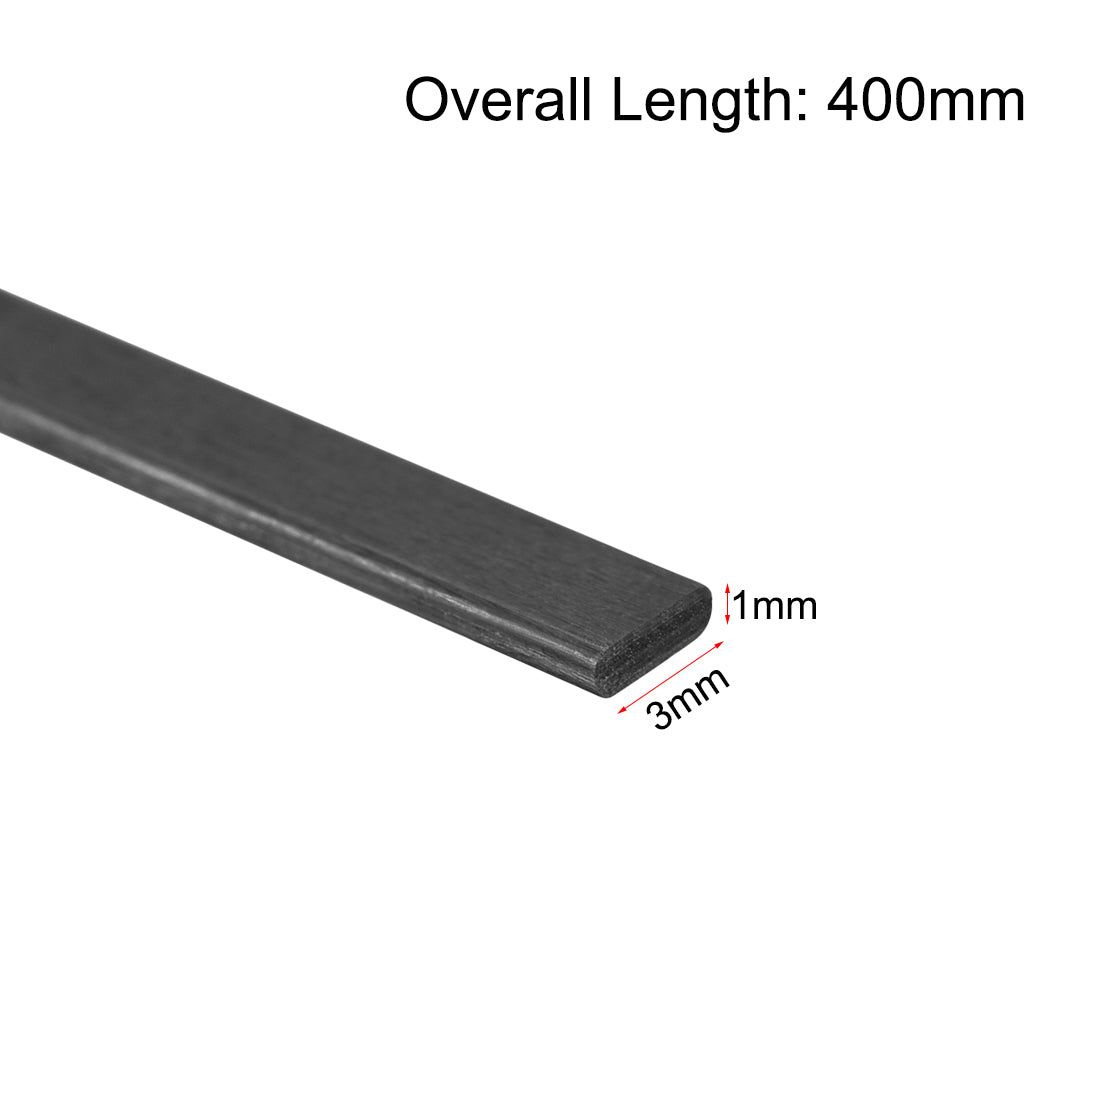 uxcell Uxcell Carbon Fiber Strip Bars 1x3mm 400mm Length Pultruded Carbon Fiber Strips for Kites, RC Airplane 5 Pcs